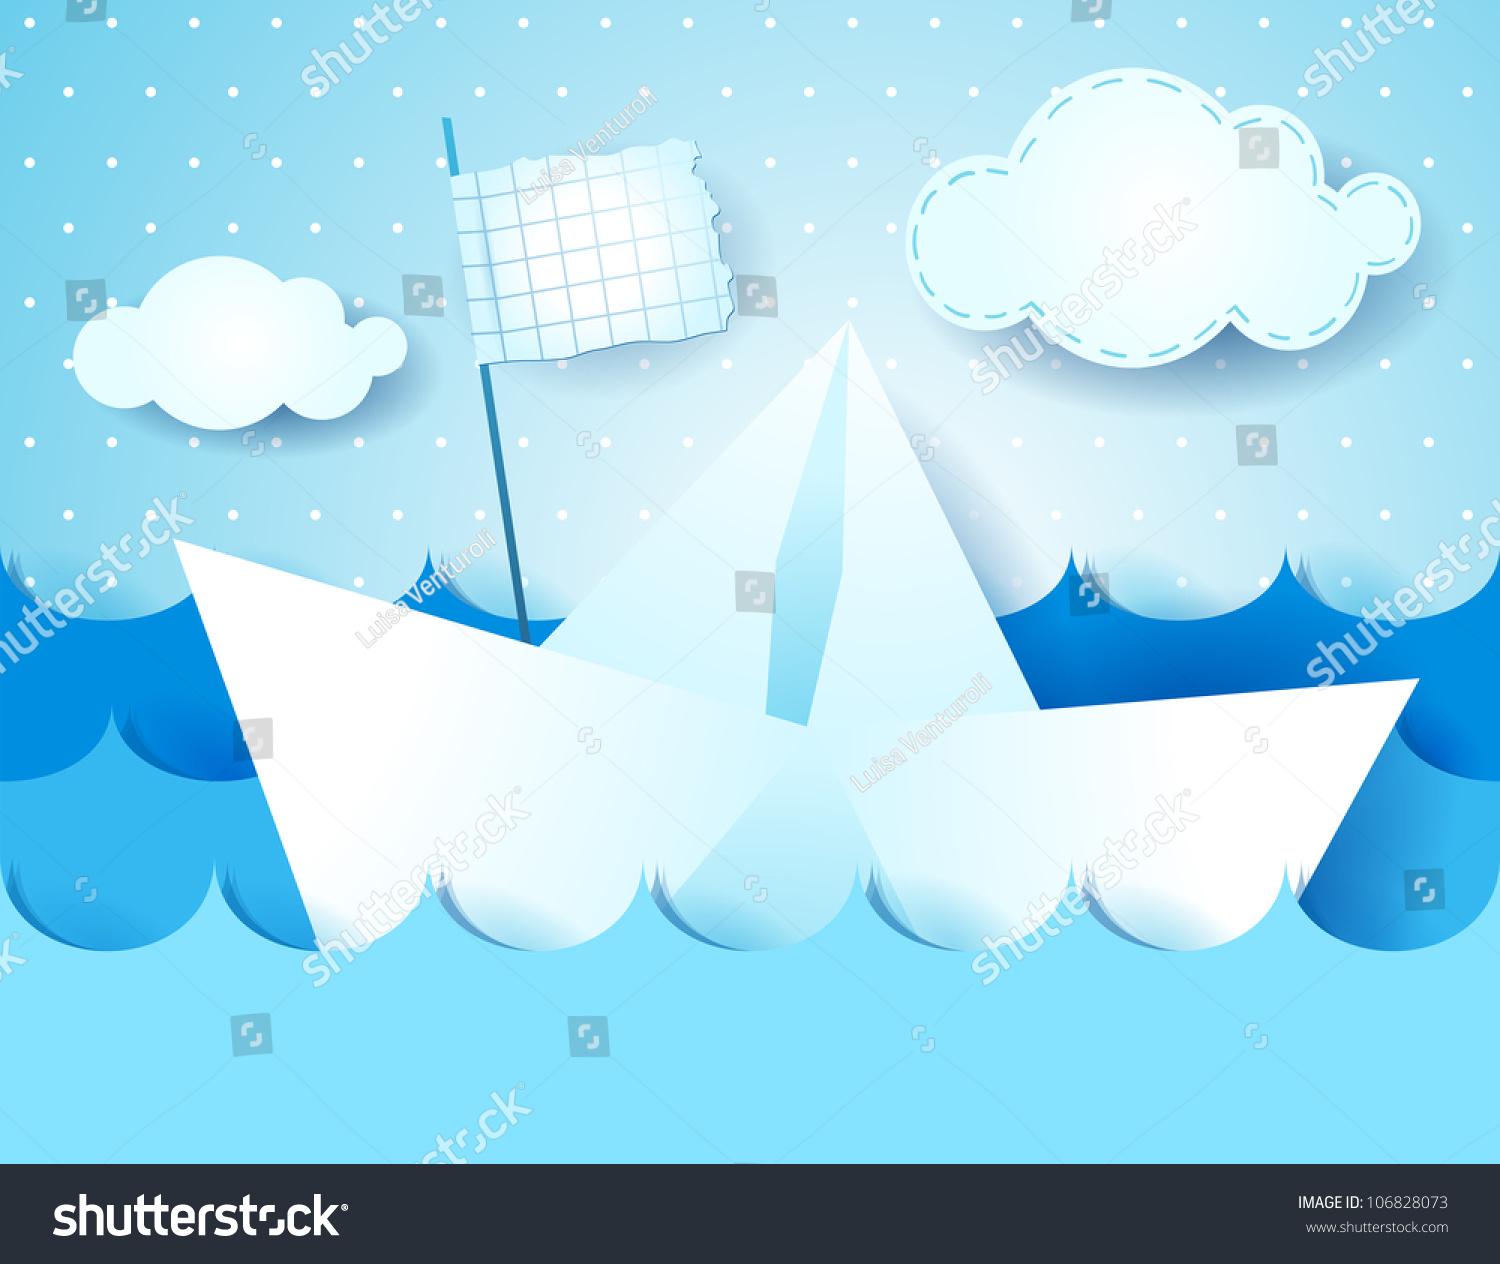 paper boat clipart - photo #23